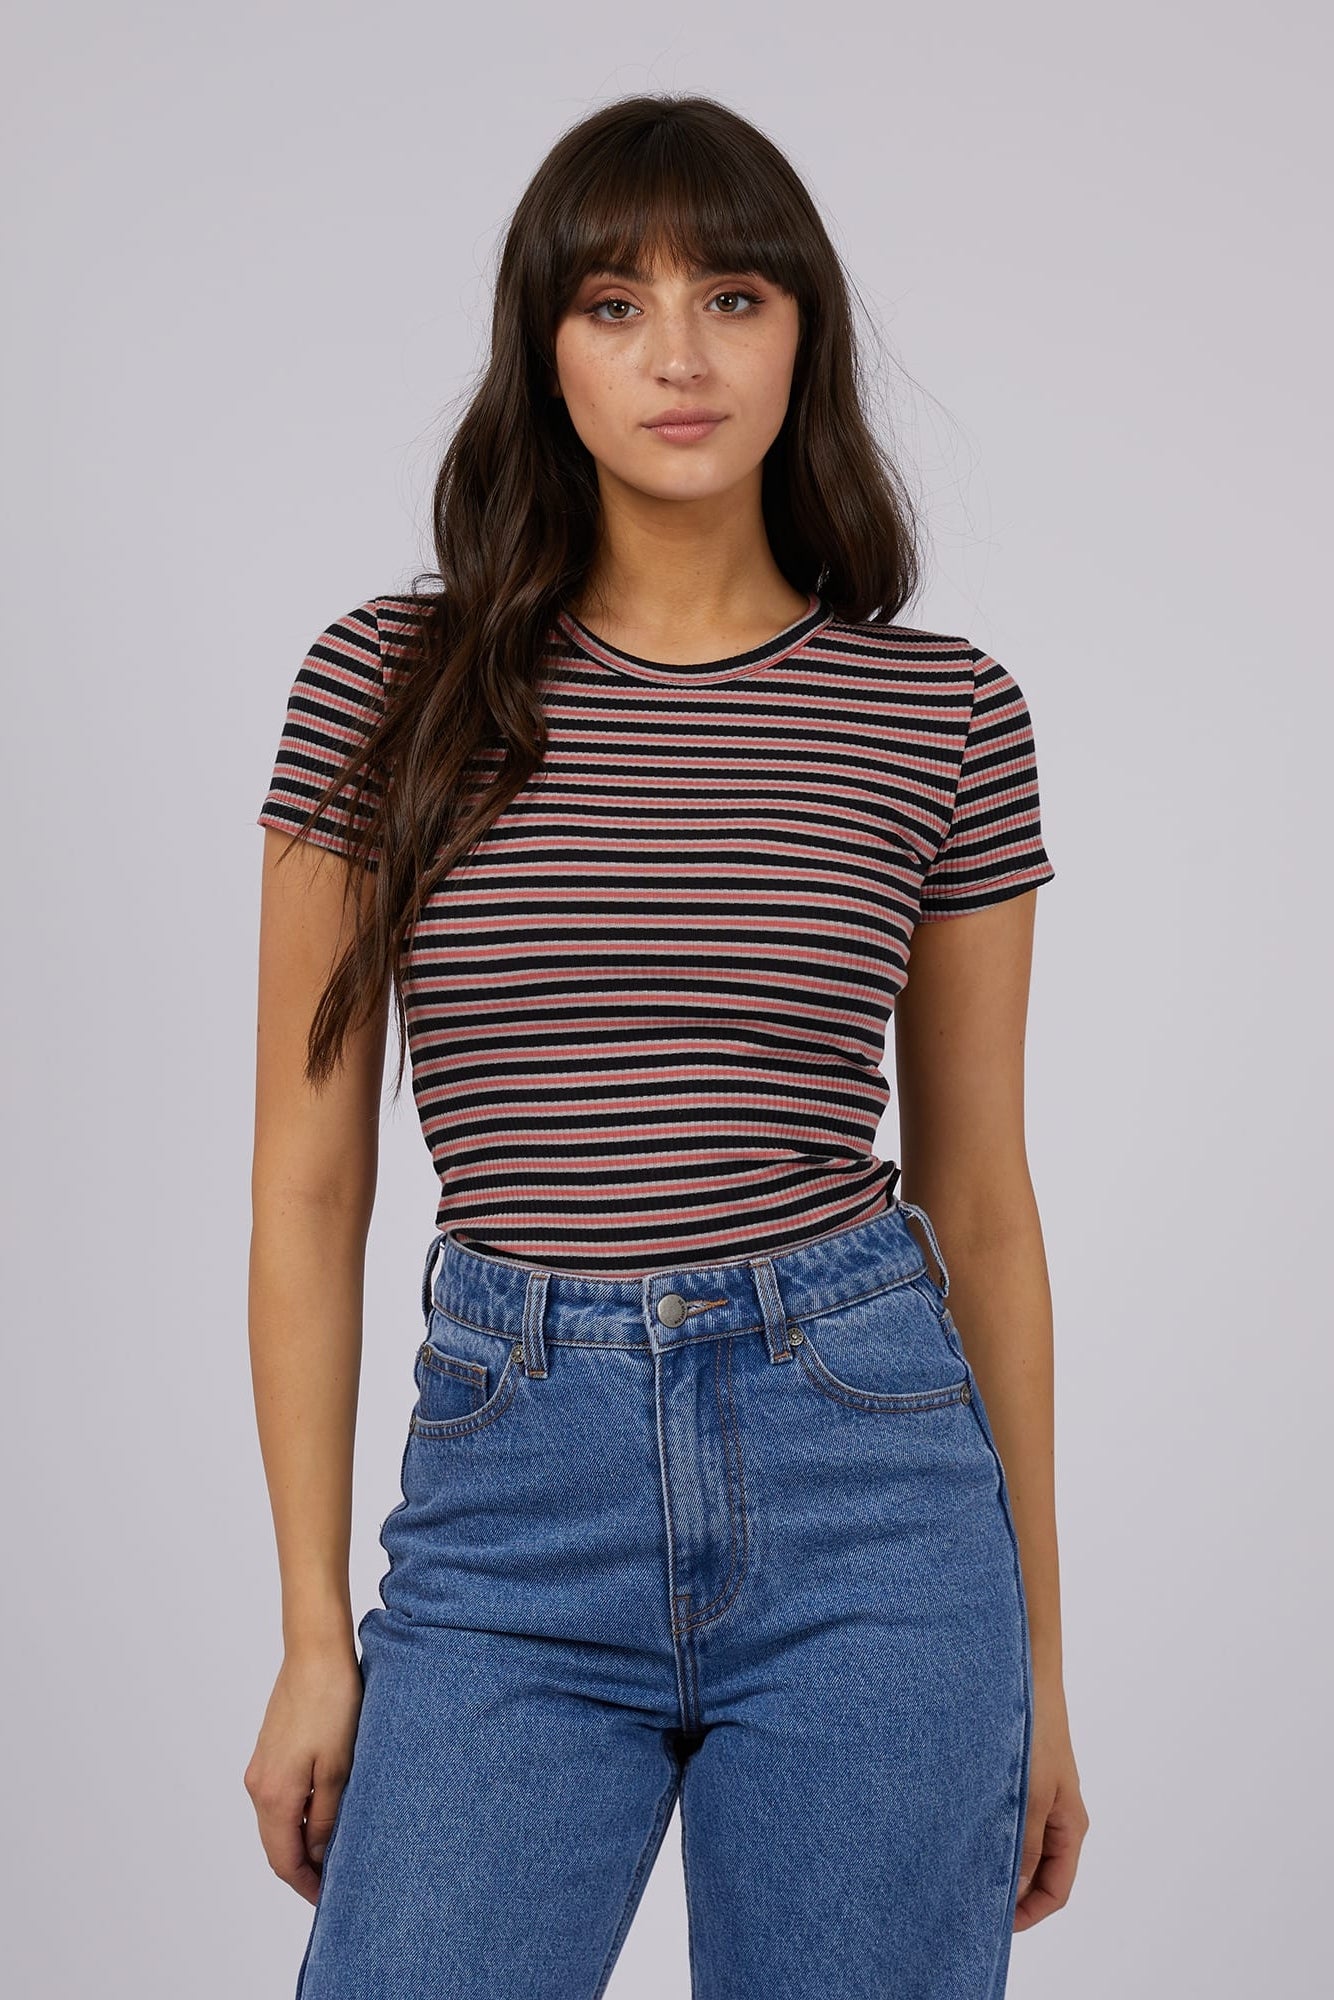 All About Eve. Eve Rib Tee - Black